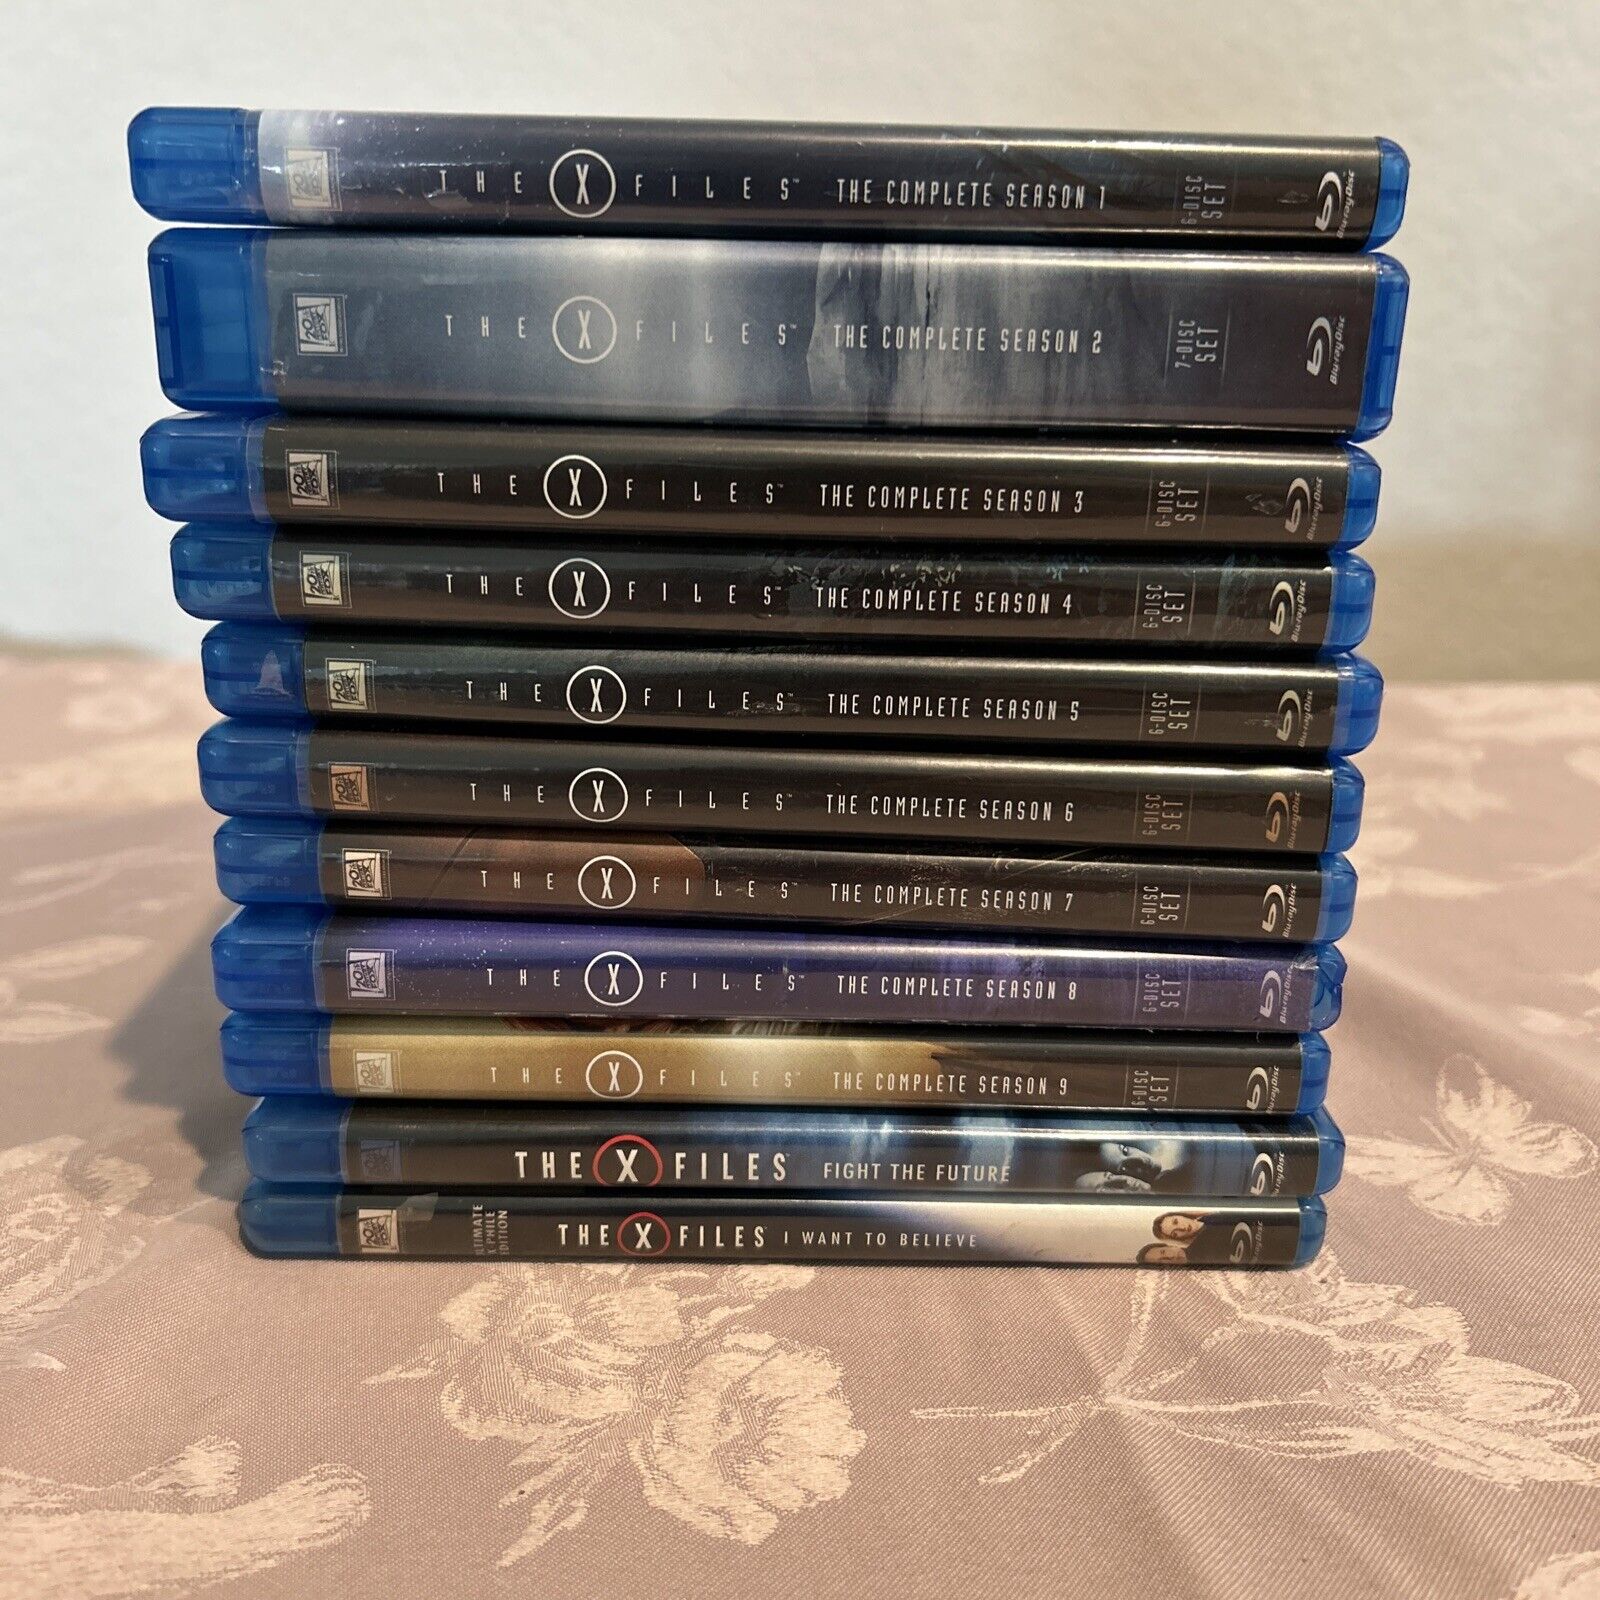 THE X-FILES COMPLETE SERIES BLU-RAY SEASONS 1-9 + 2 MOVIE COLLECTION